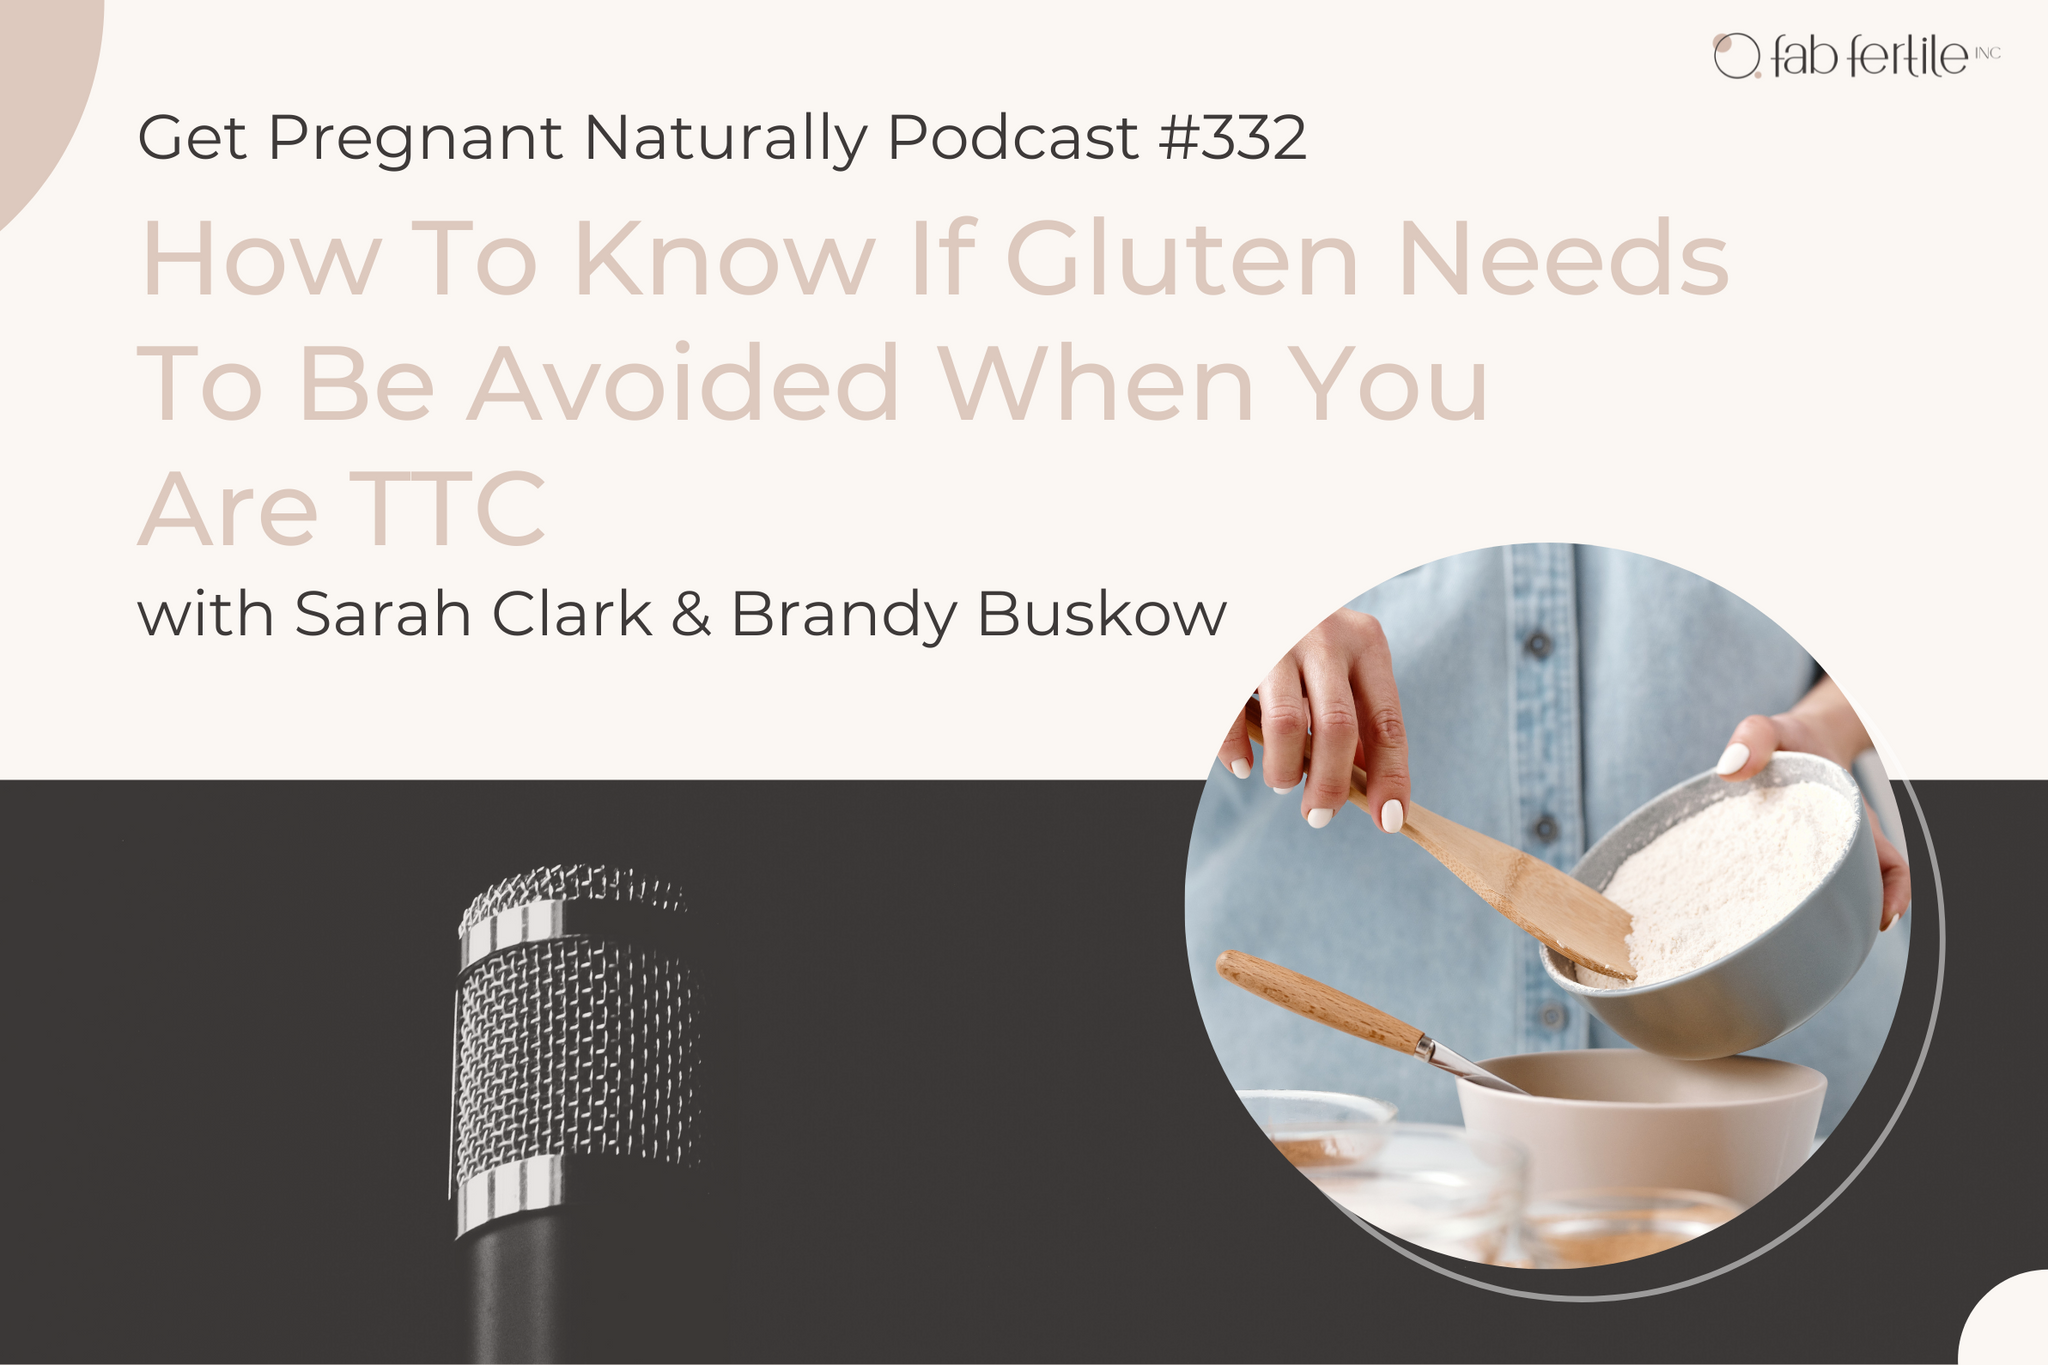 How To Know If Gluten Needs To Be Avoided When You Are TTC